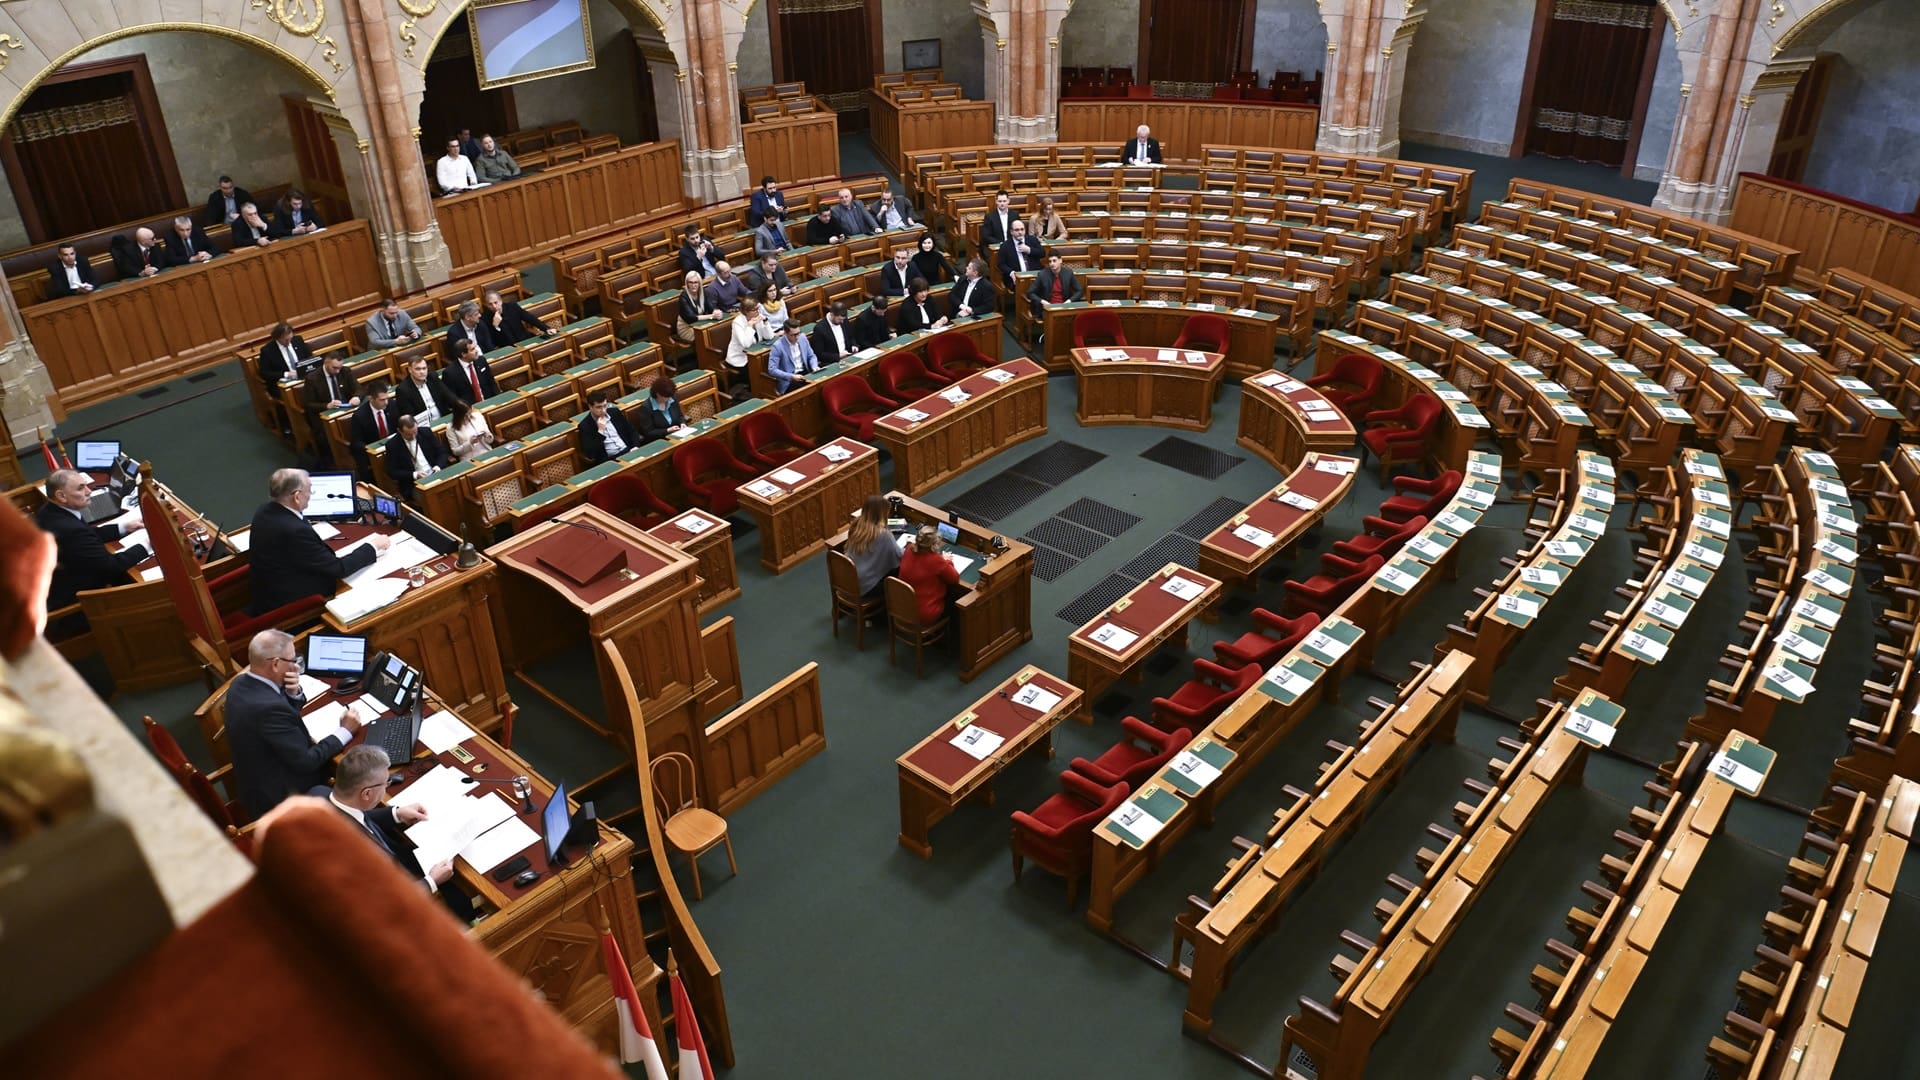 The floor of the Hungarian National Assembly during the extraordinary session on 5 February